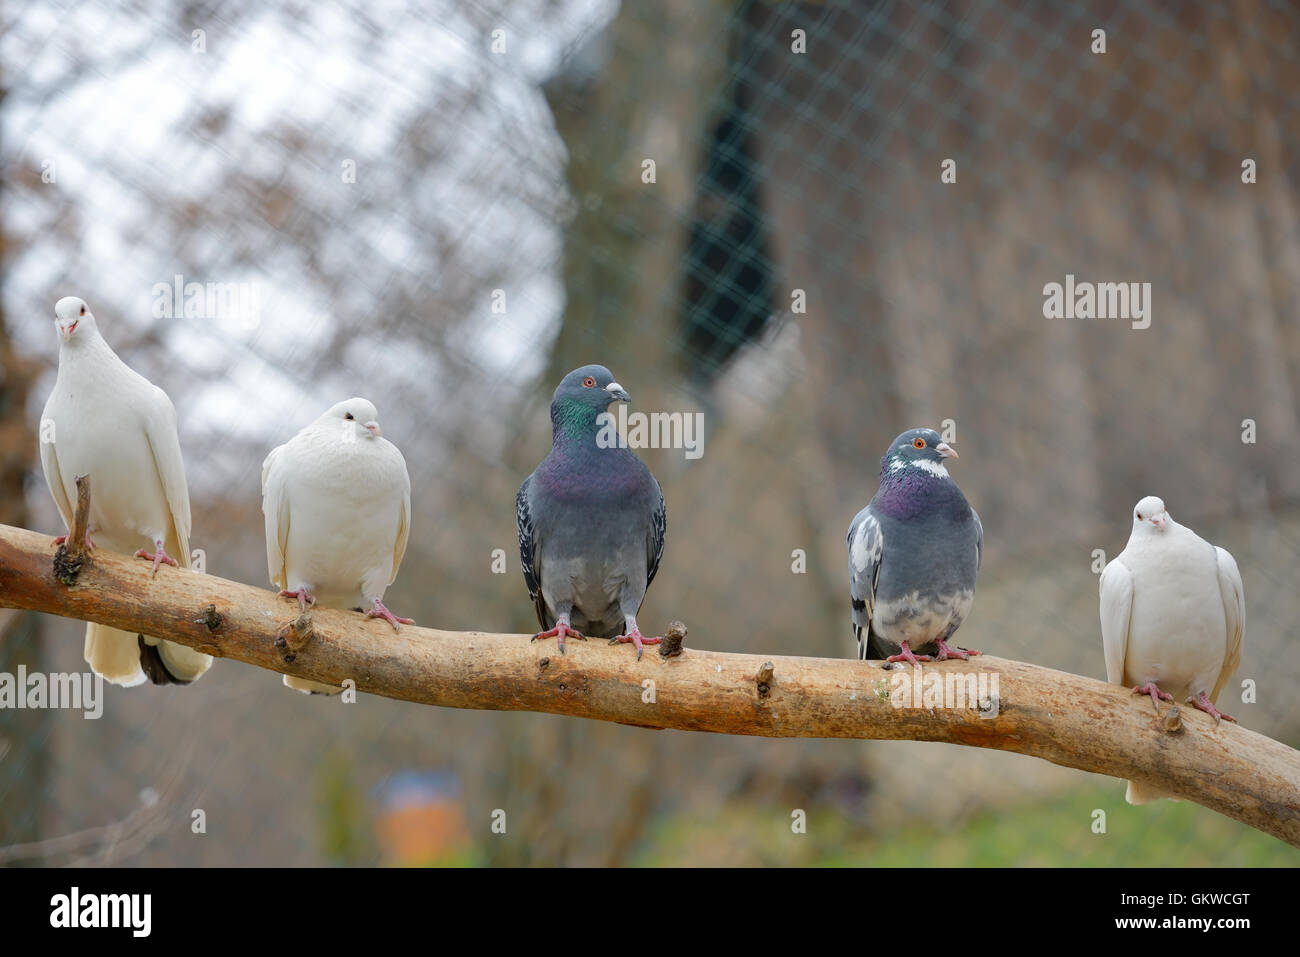 pigeons sit on a tree branch Stock Photo